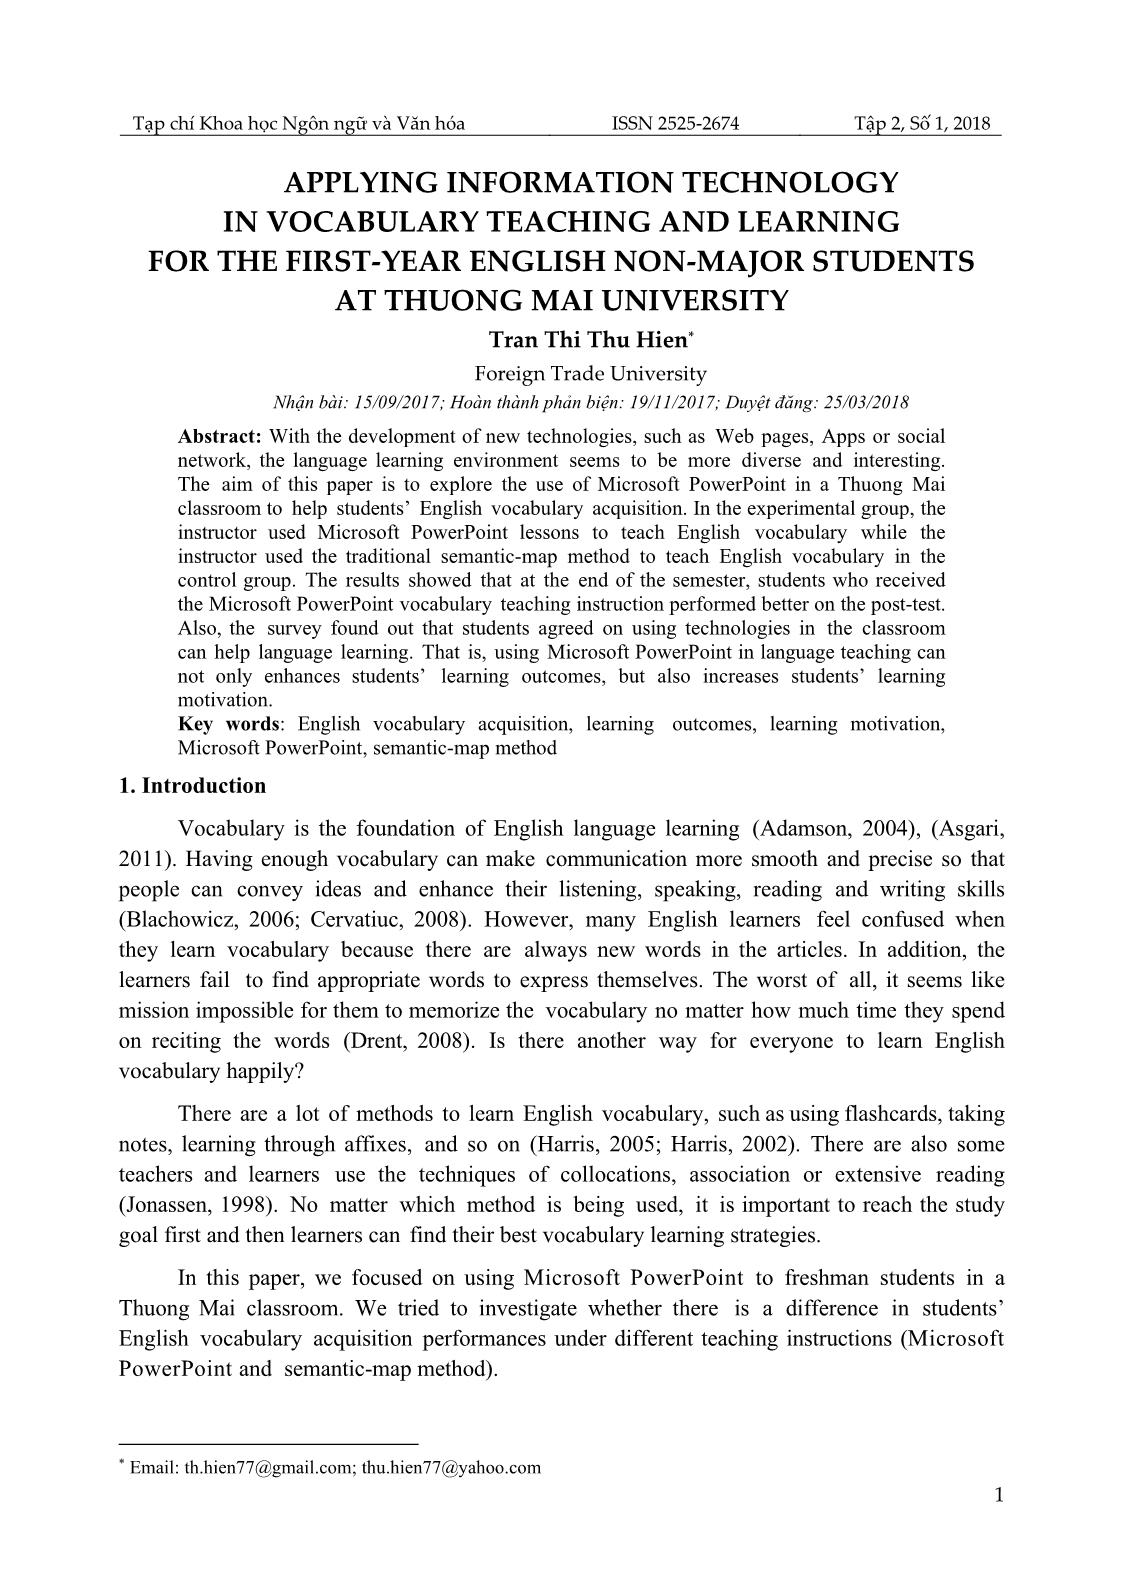 Applying information technology in vocabulary teaching and learning for the first-year English non-major students at Thuong Mai University trang 1